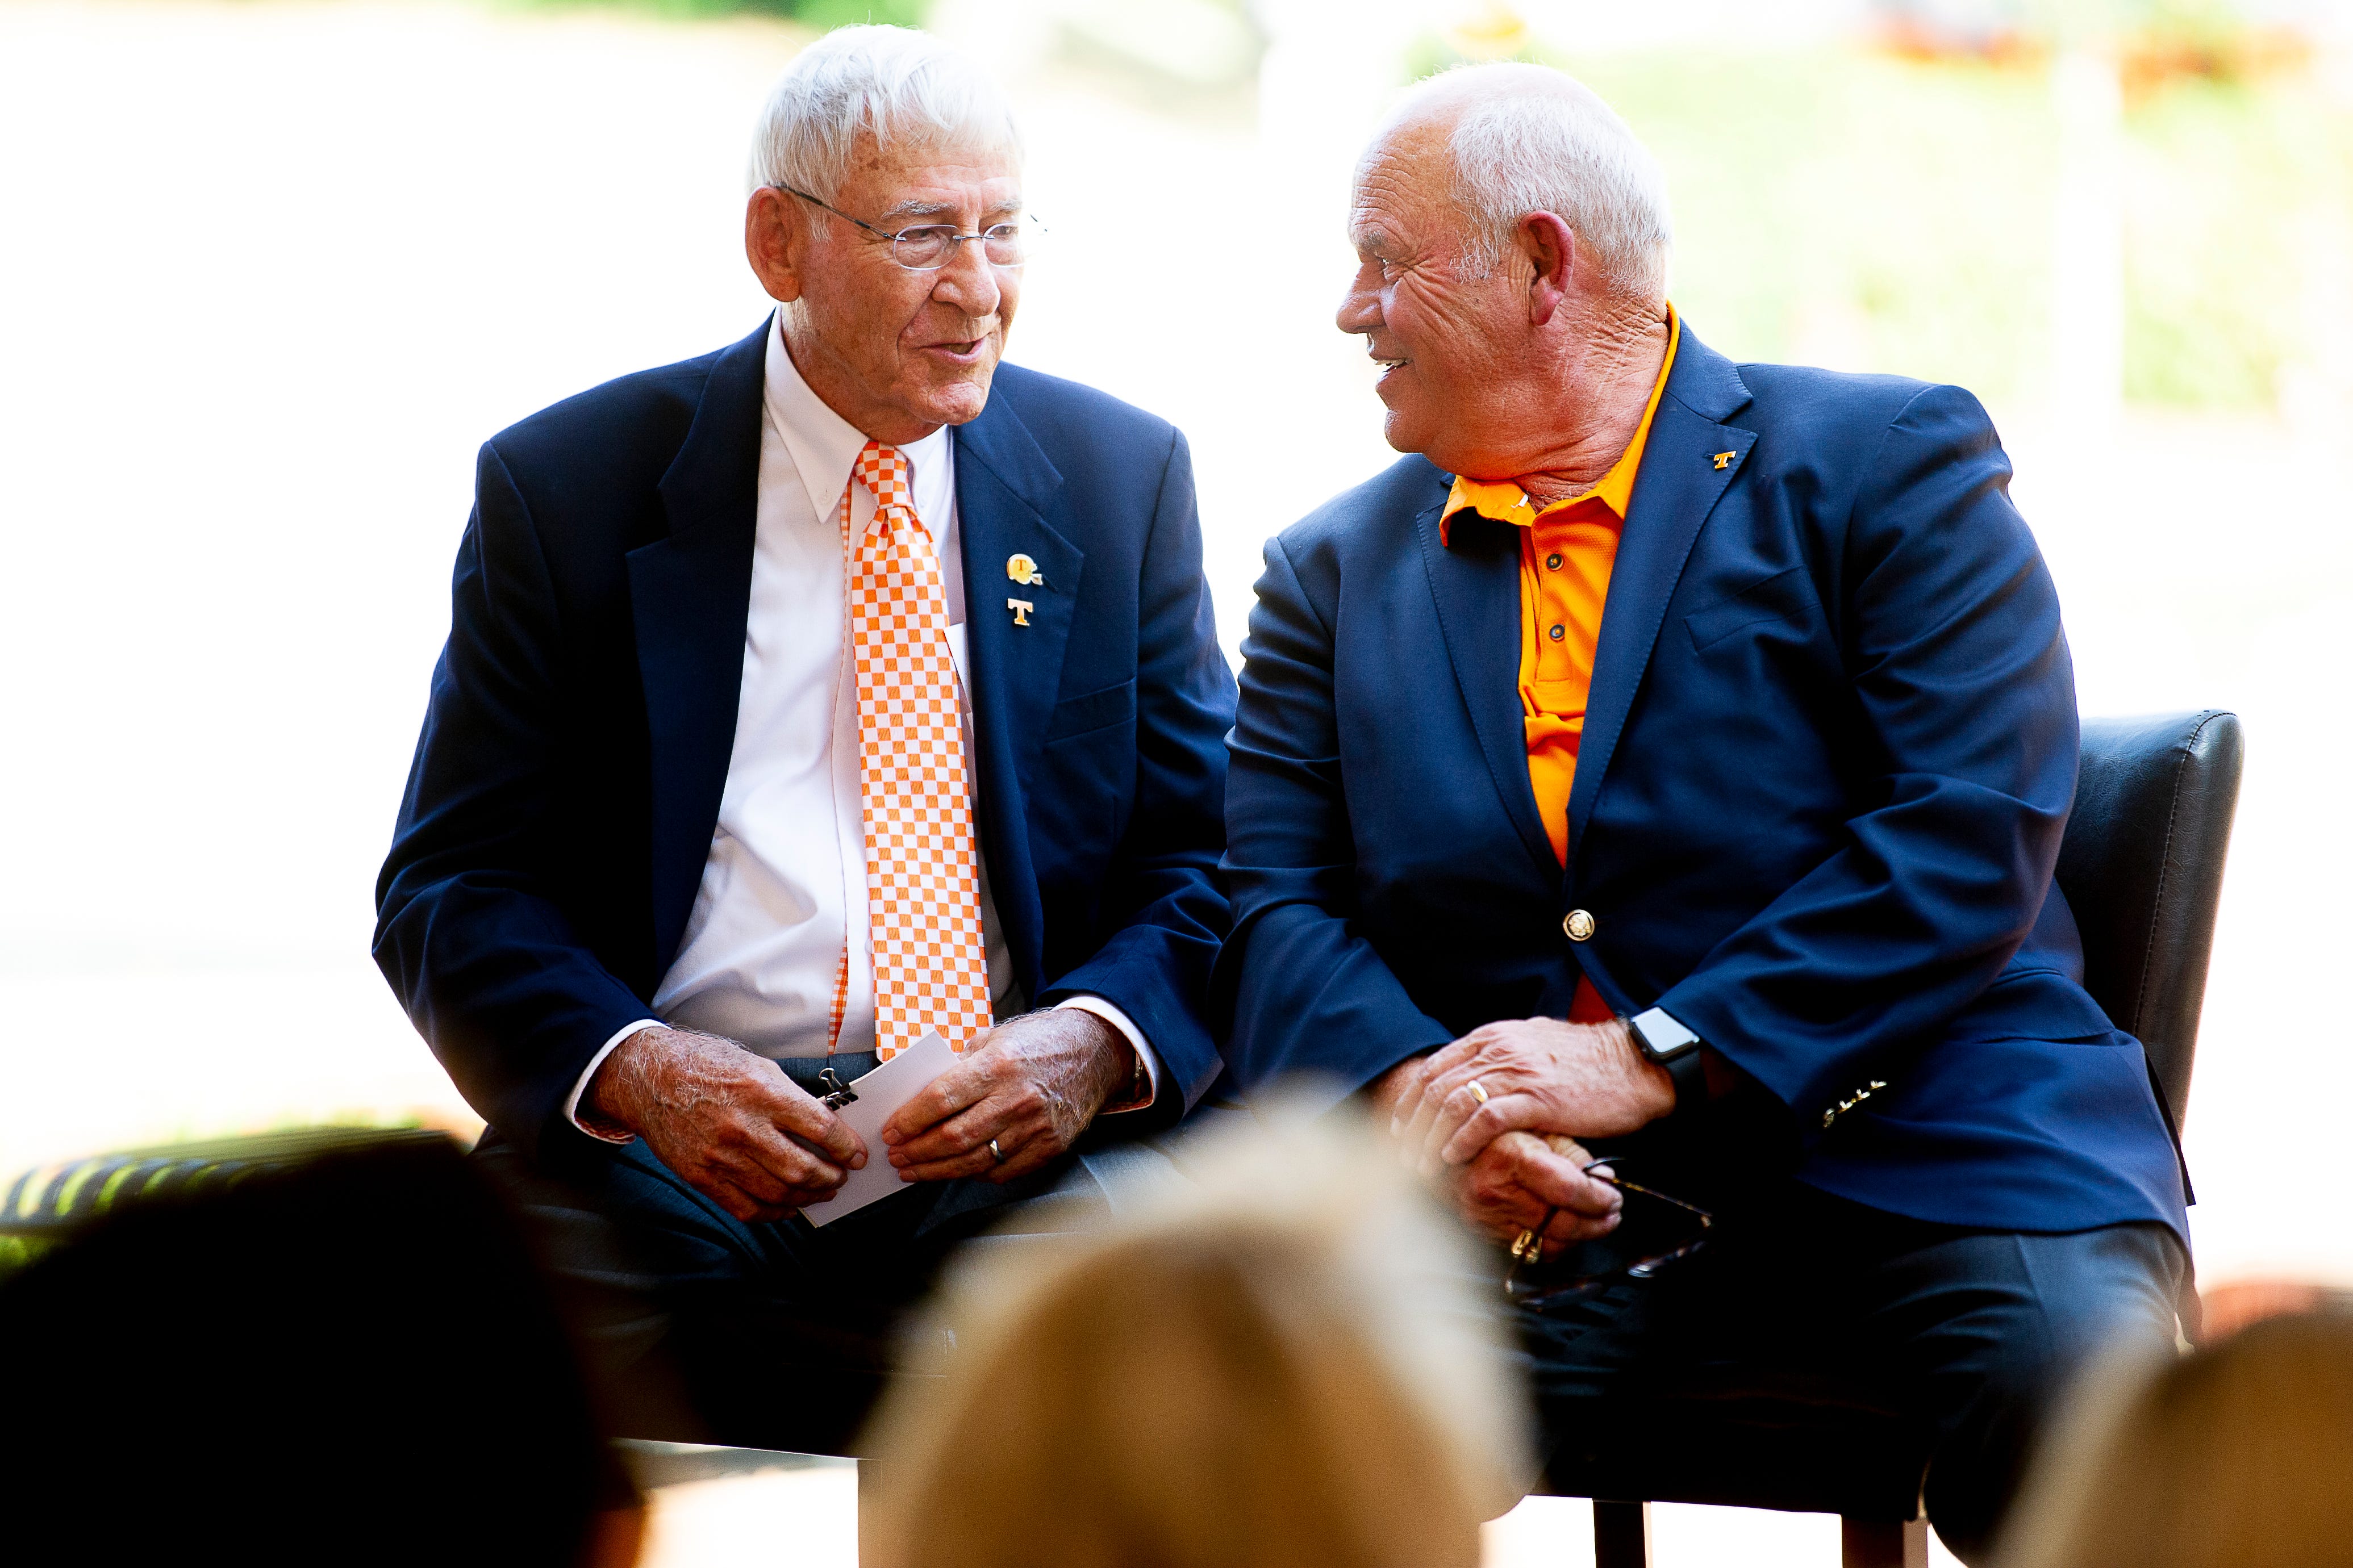 Former Tennessee coach and athletic director Doug Dickey and current athletic director and former coach Phillip Fulmer share a laugh during a dedication ceremony of the Doug Dickey Hall of Fame Plaza at the Neyland-Thompson Sports Complex in Knoxville, Tennessee on Friday, October 4, 2019. Dickey led UT to its second SEC title in 1969 and served as the Vols' Director of Athletics from 1986 to 2003.